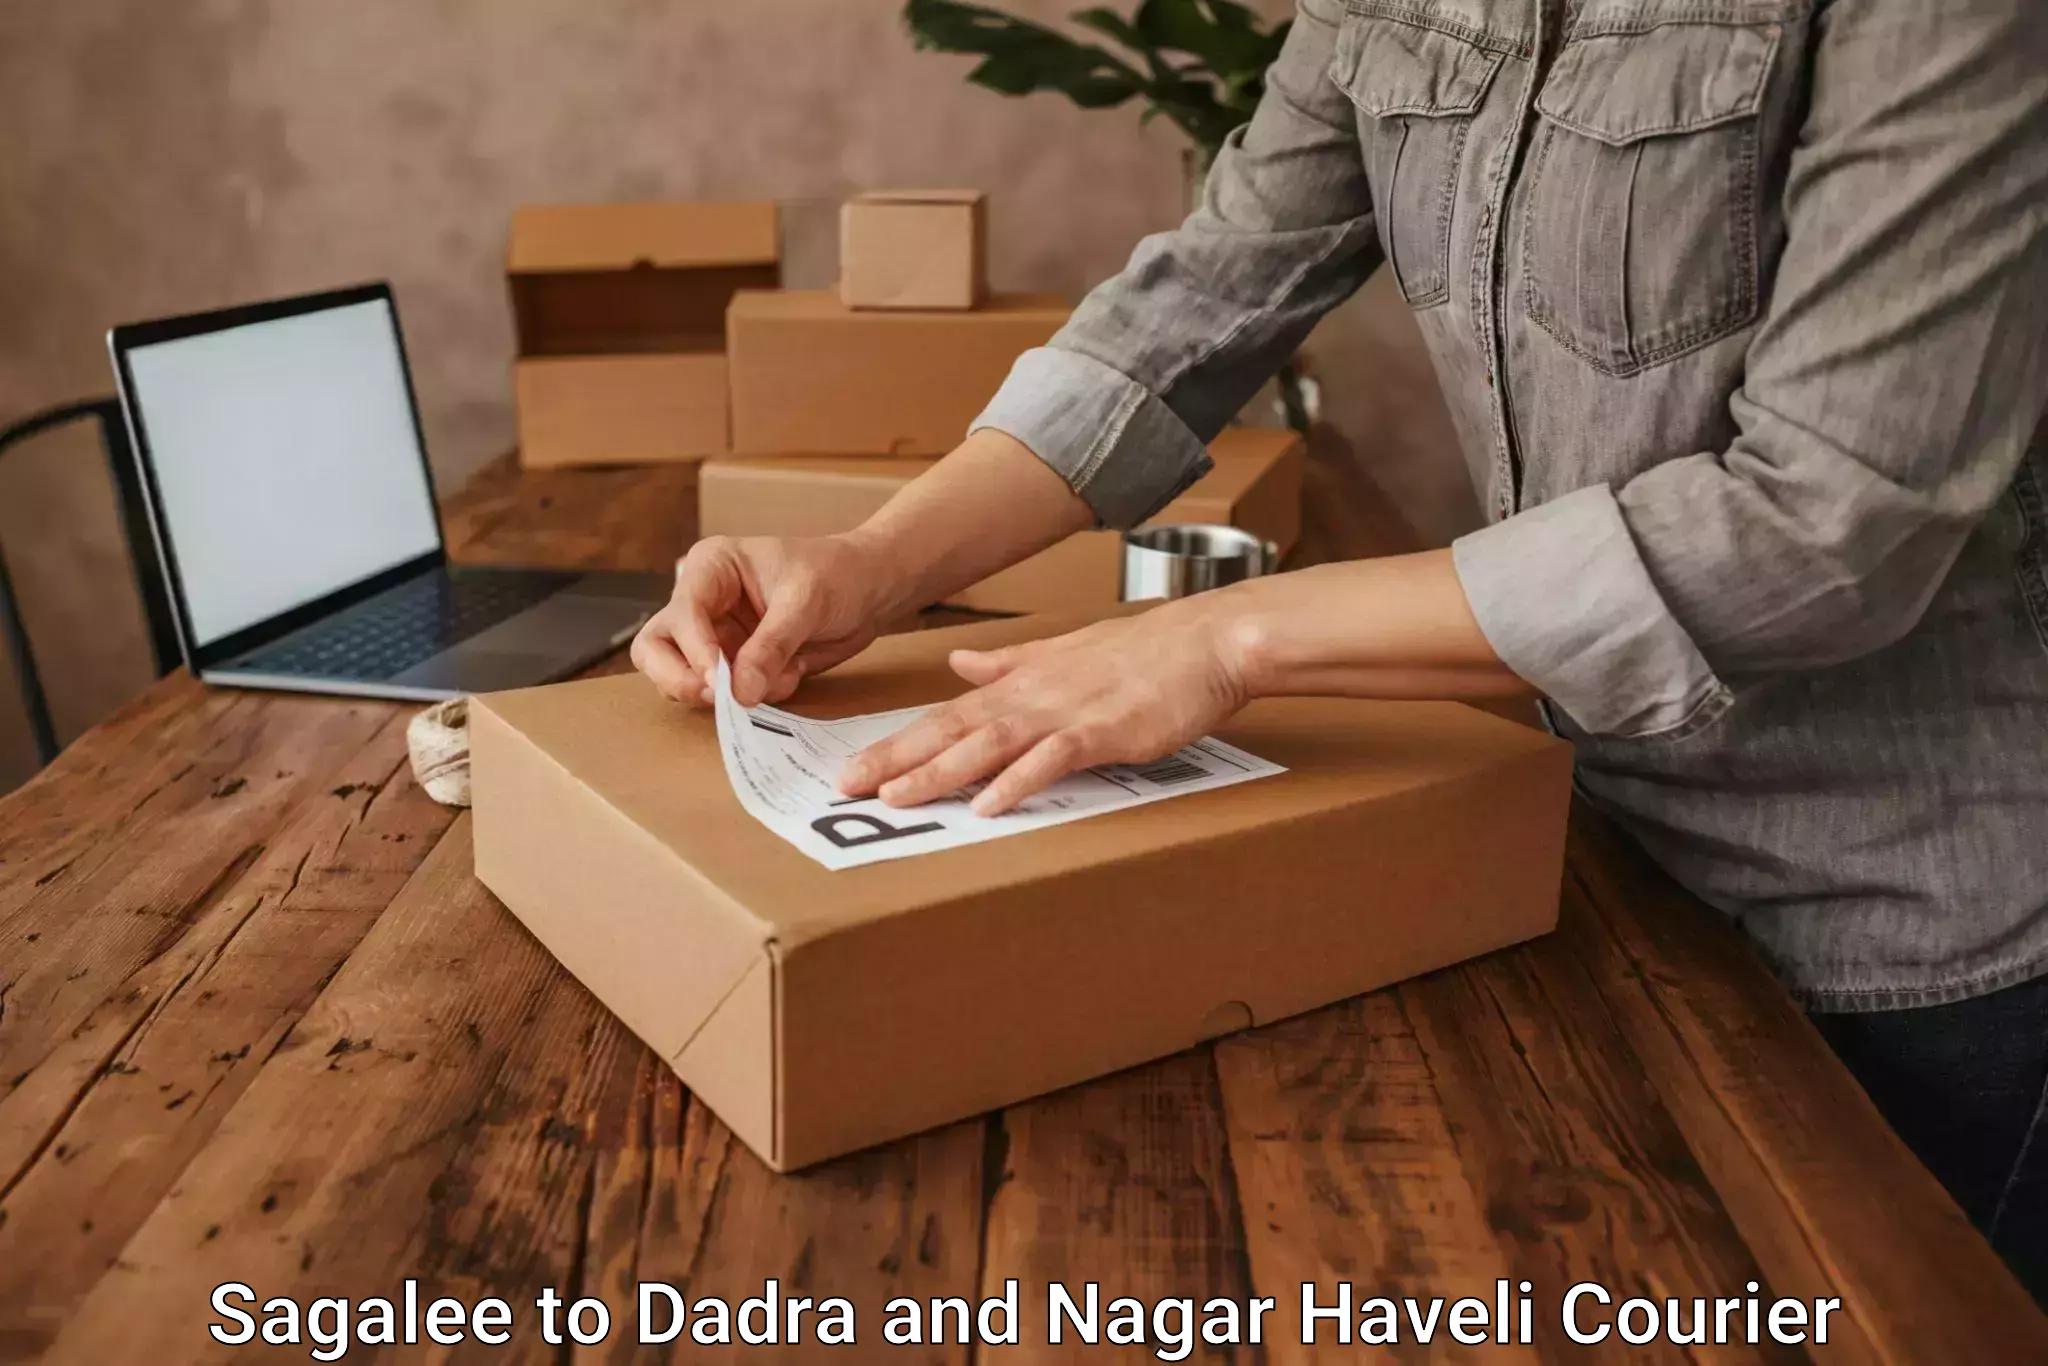 Ocean freight courier Sagalee to Dadra and Nagar Haveli